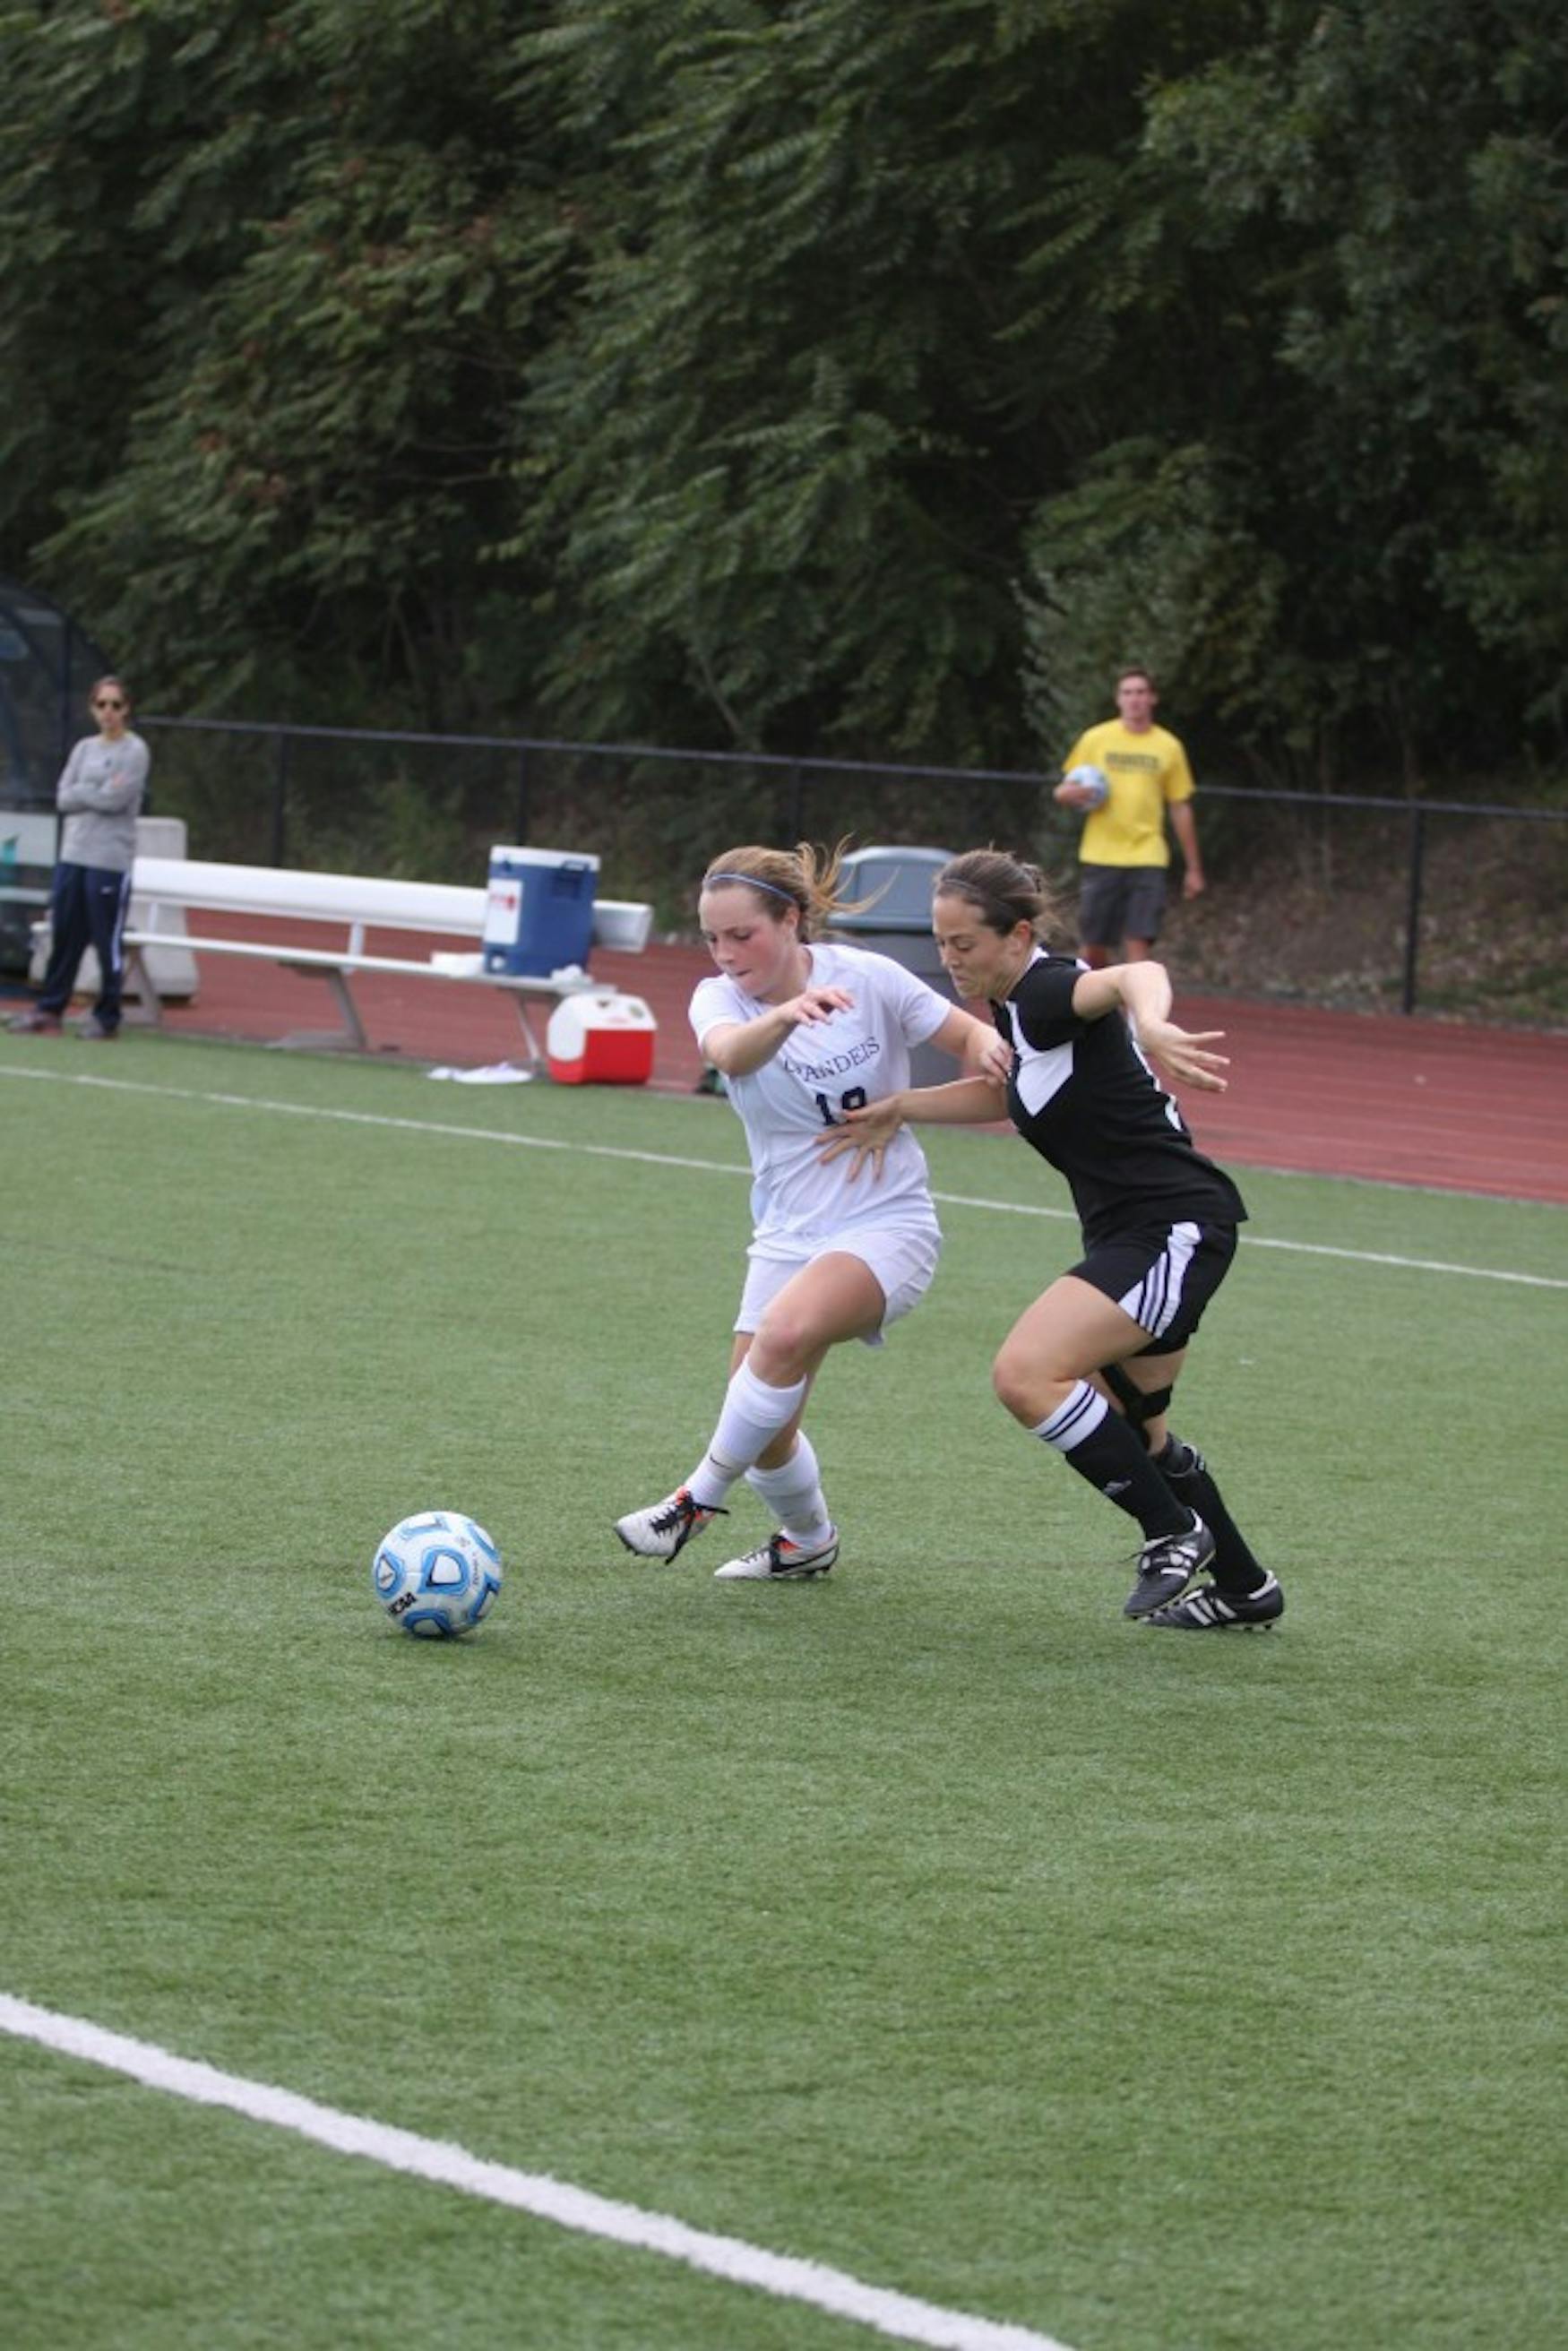 POSESSION BATTLE: Forward Samantha Schwartz ’18 (left) wins possesion from a Lesley College defender in a 1-0 win last Sept.